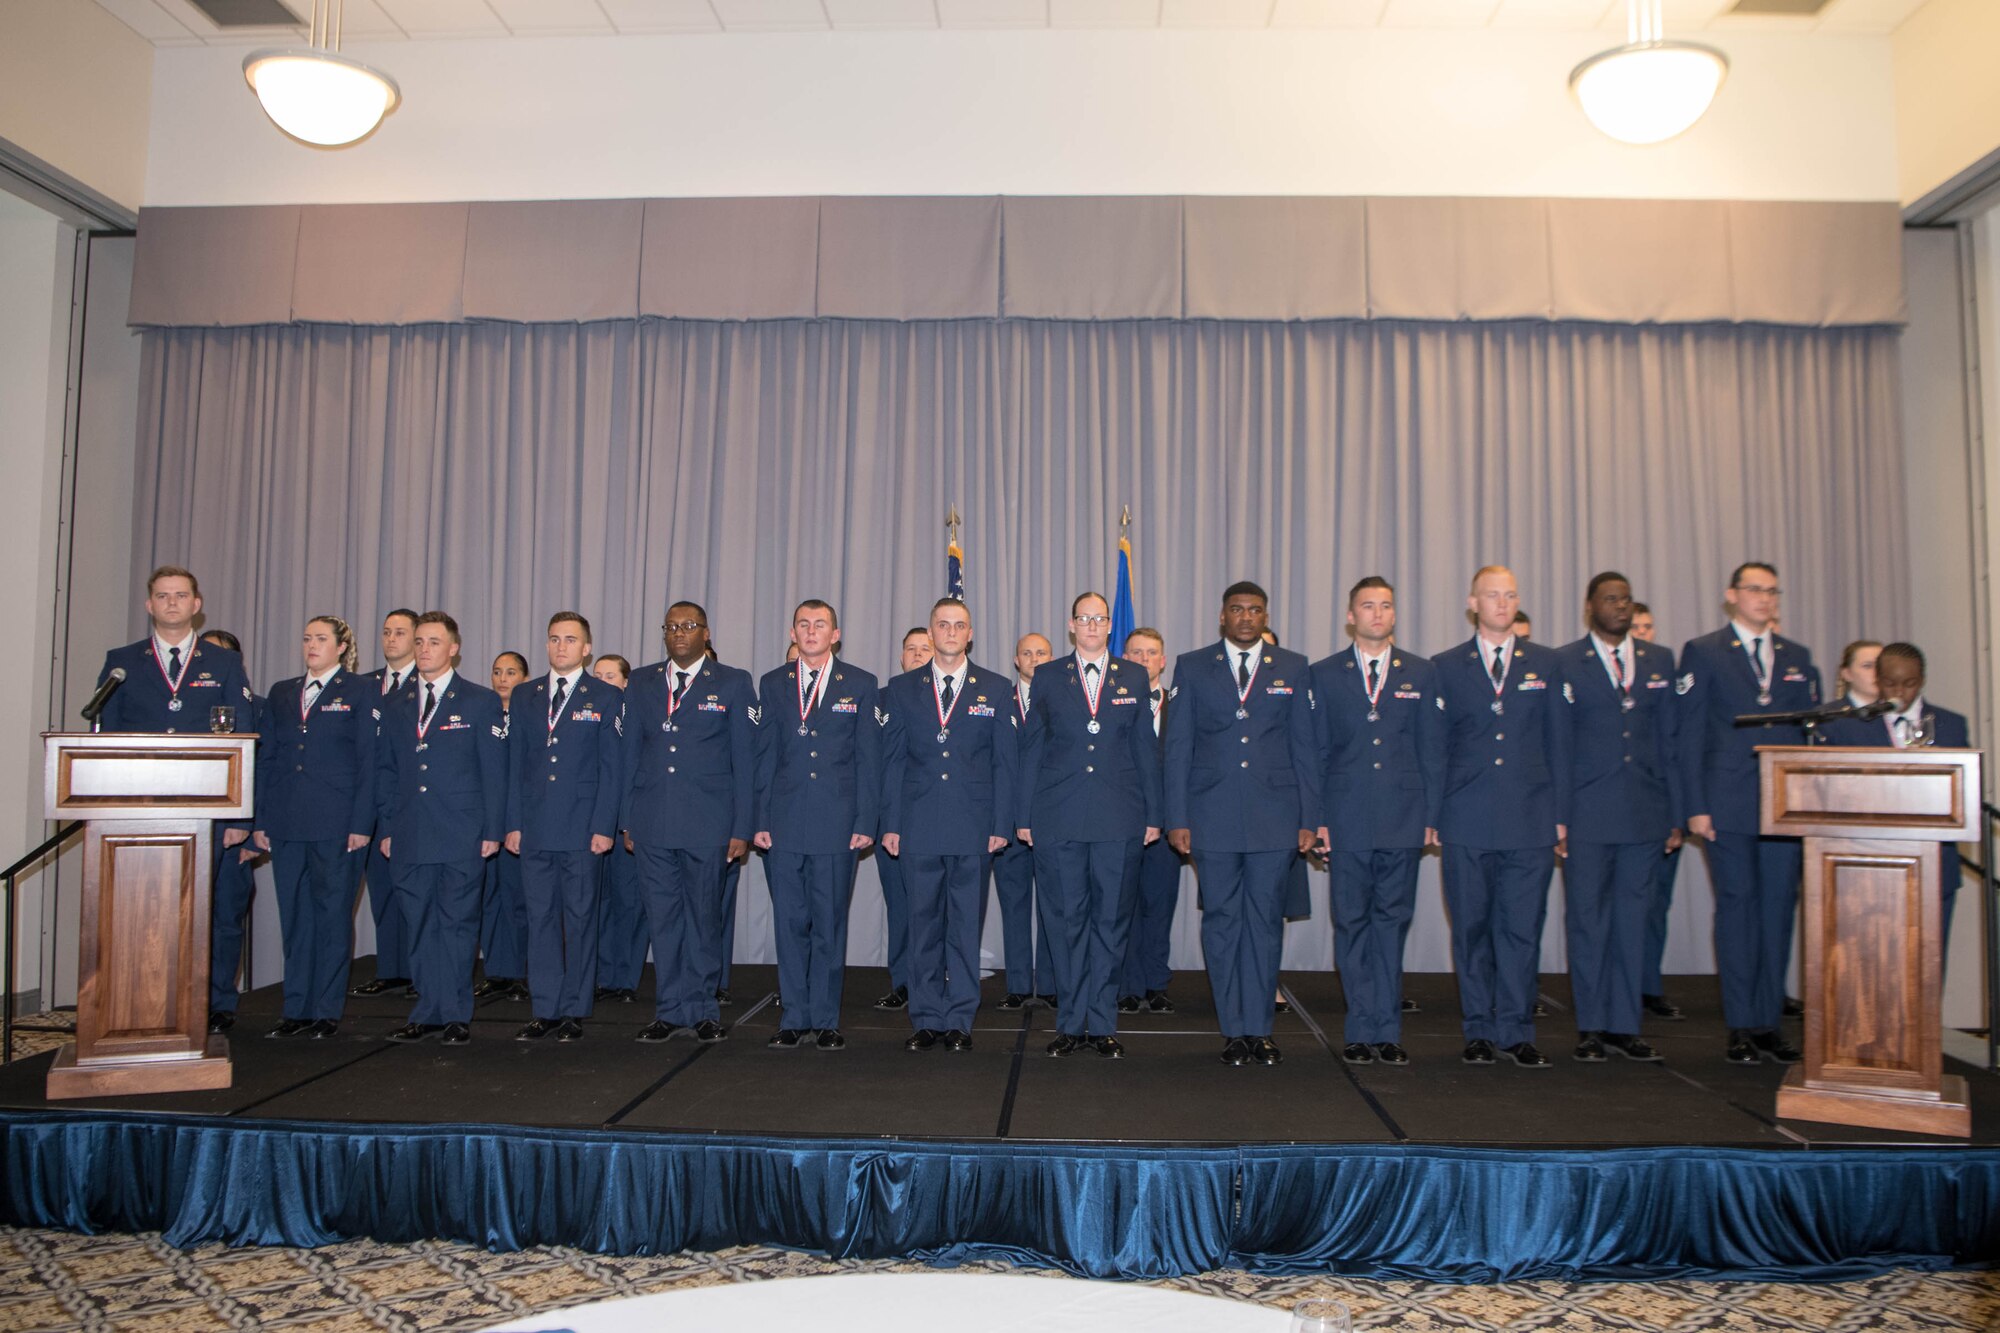 Graduates of the Staff Sgt. Julio Alonso Airman Leadership School, Class 21-F, recite the Airman’s Creed during their graduation ceremony held at The Landings on Dover Air Force Base, Delaware, July 22, 2021. Twenty-nine Airmen graduated at the first post-COVID-19 dinner and graduation ceremony. (U.S. Air Force photo by Mauricio Campino)